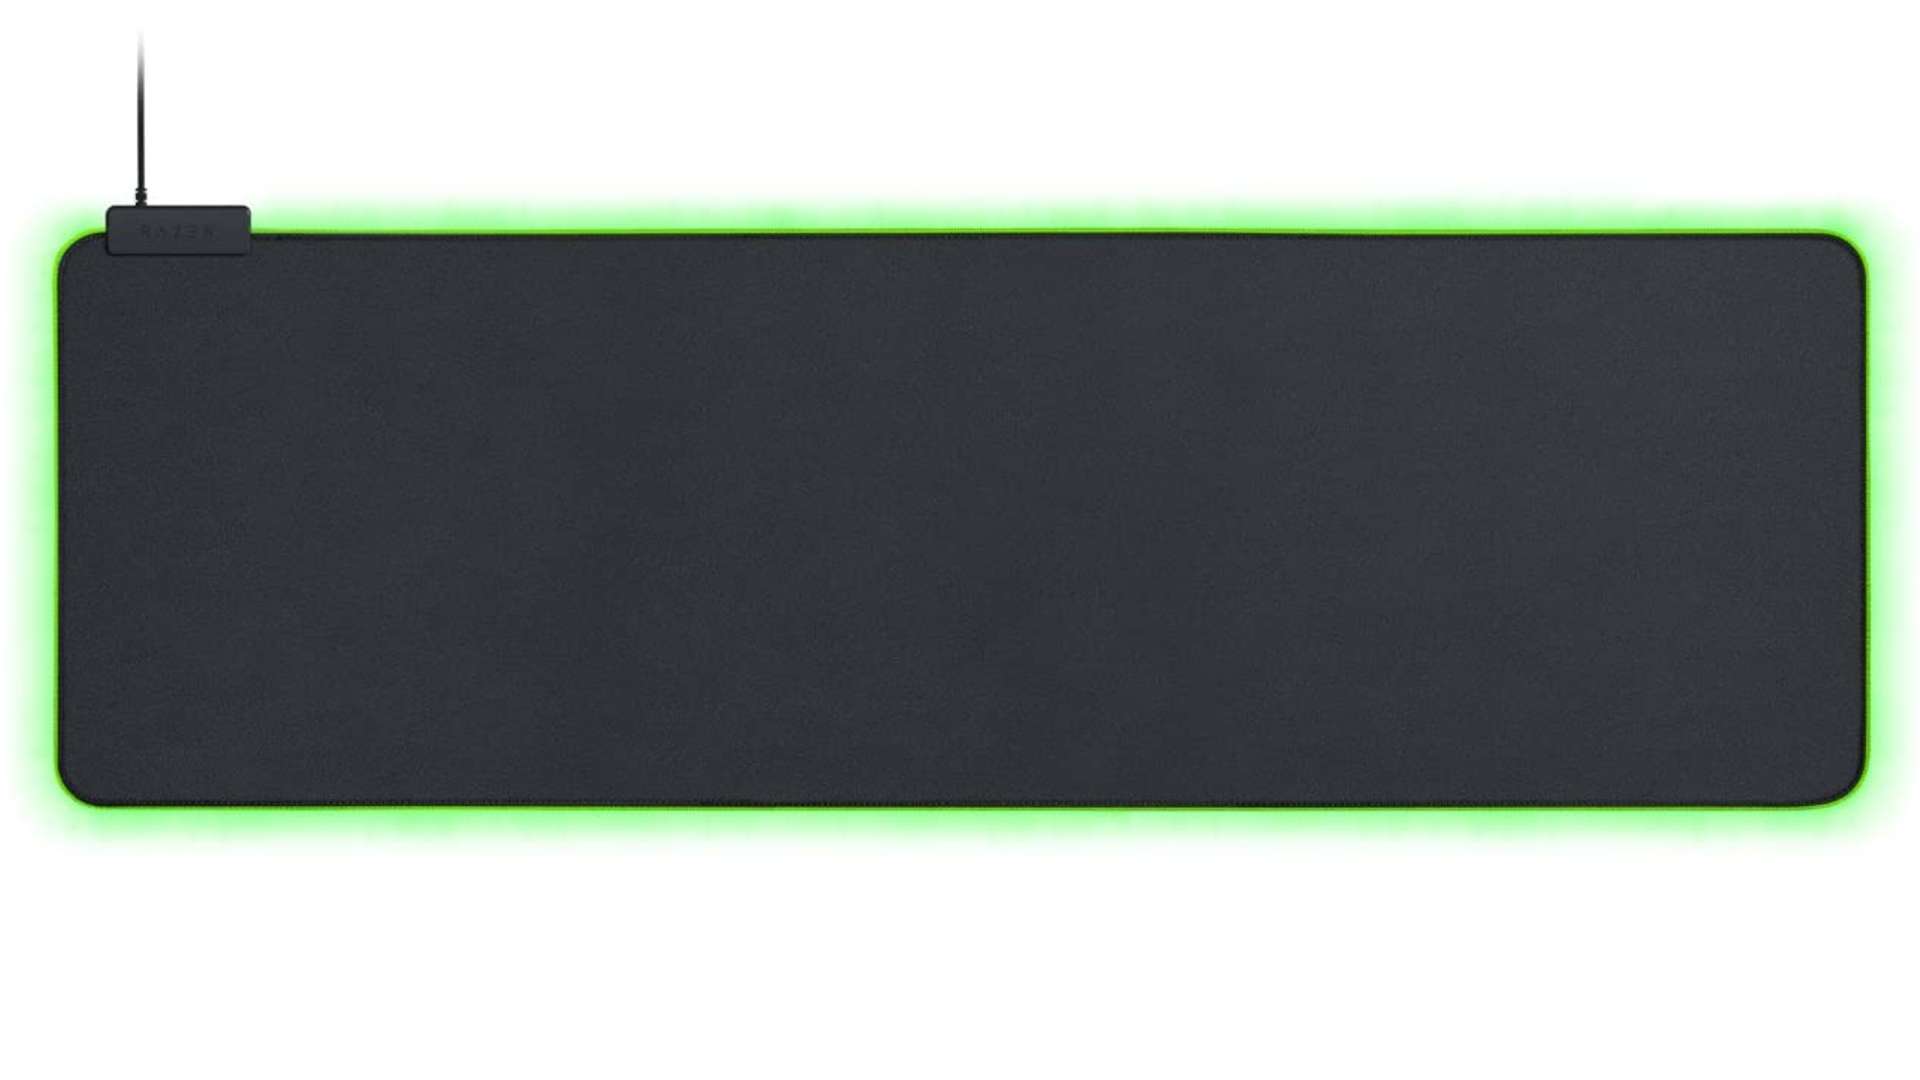 The Razer Goliathus Extended Chroma Mouse Pad features green RGB backlit edges on a white background.